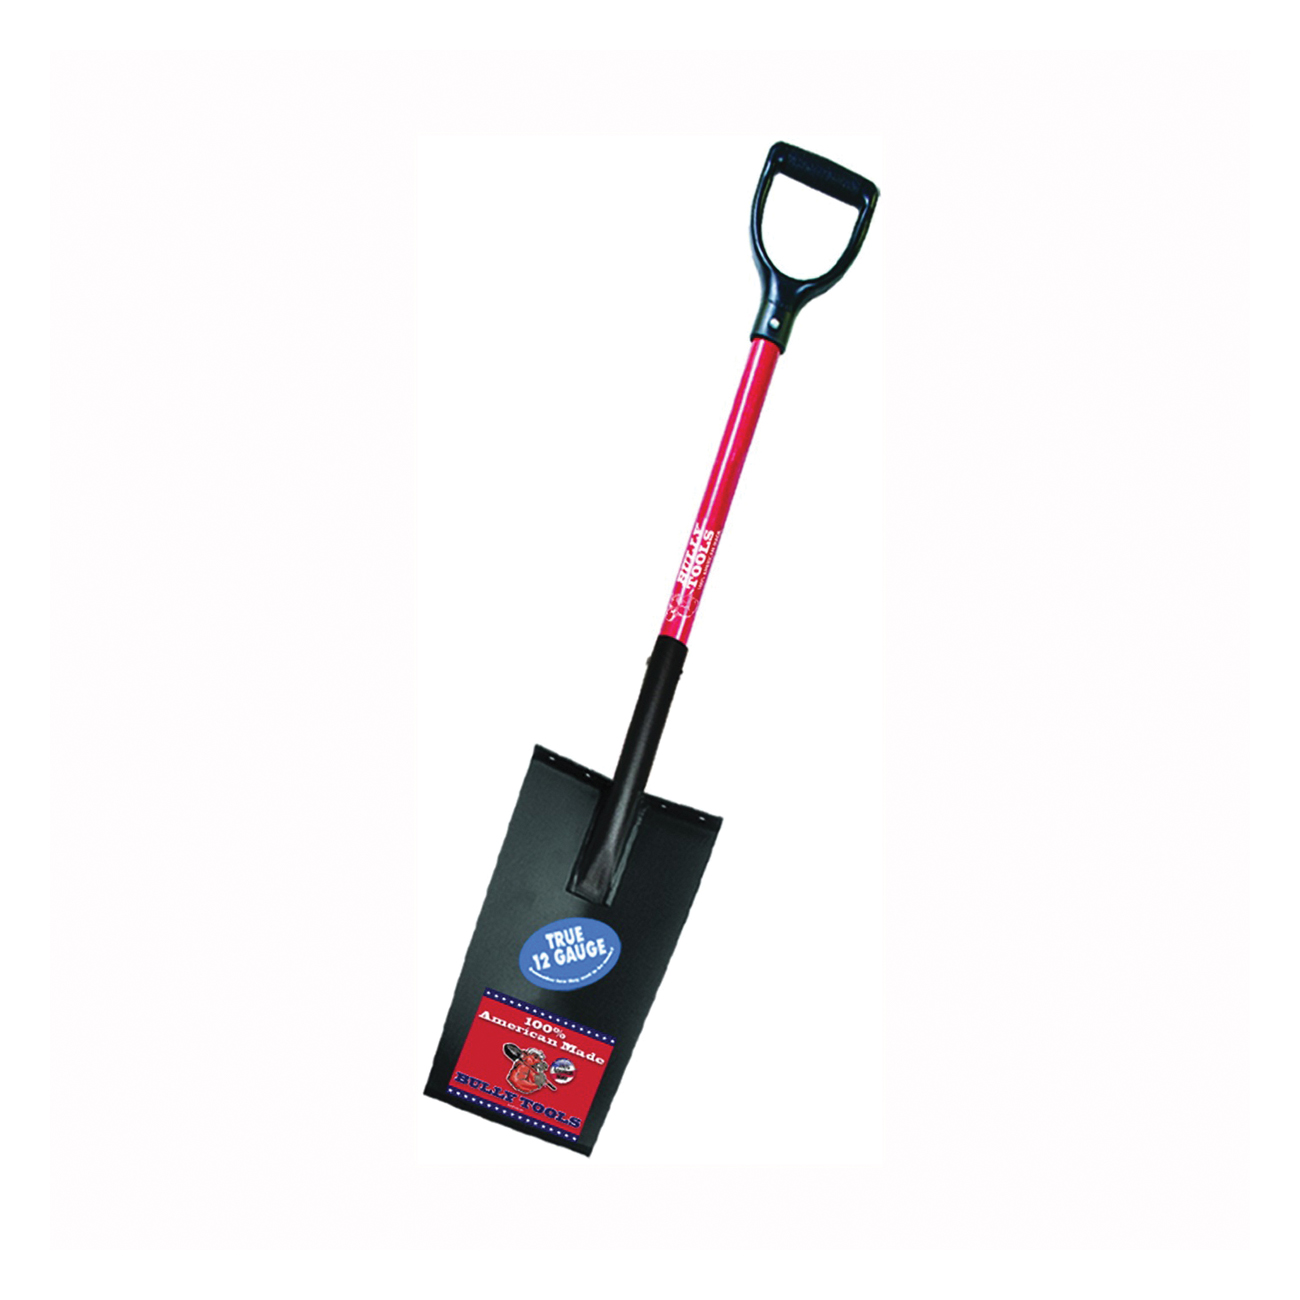 82500 Edging and Planting Spade, 7-1/2 in W Blade, Steel Blade, Fiberglass Handle, D-Shaped Handle